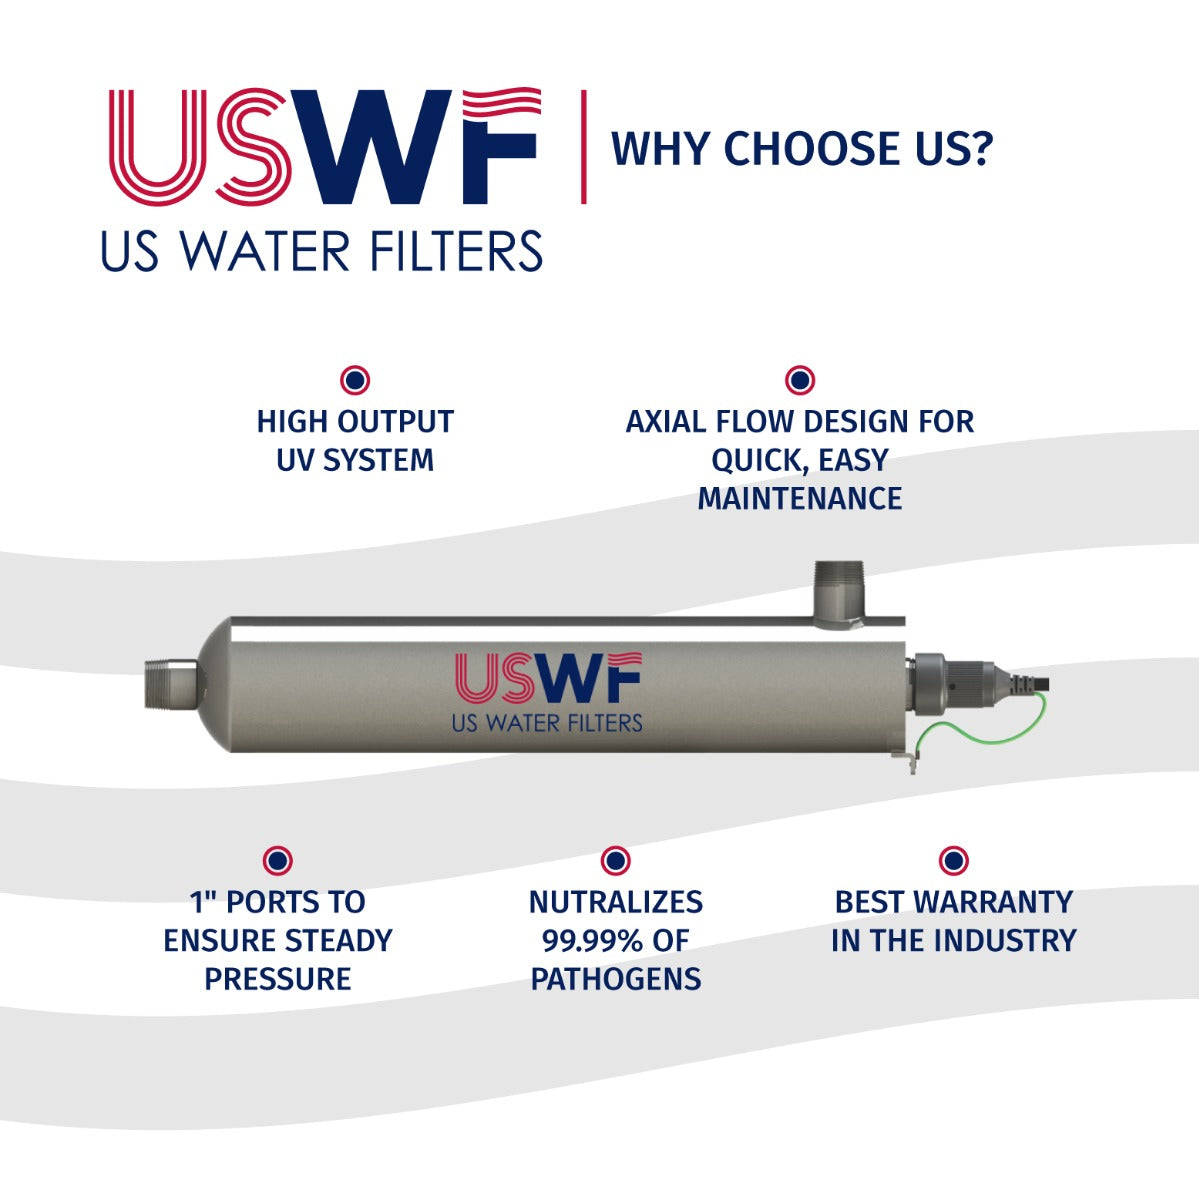 USWF RL330HO Replacement UV Lamp | Fits US Water Filters 4C101 Whole House UV System